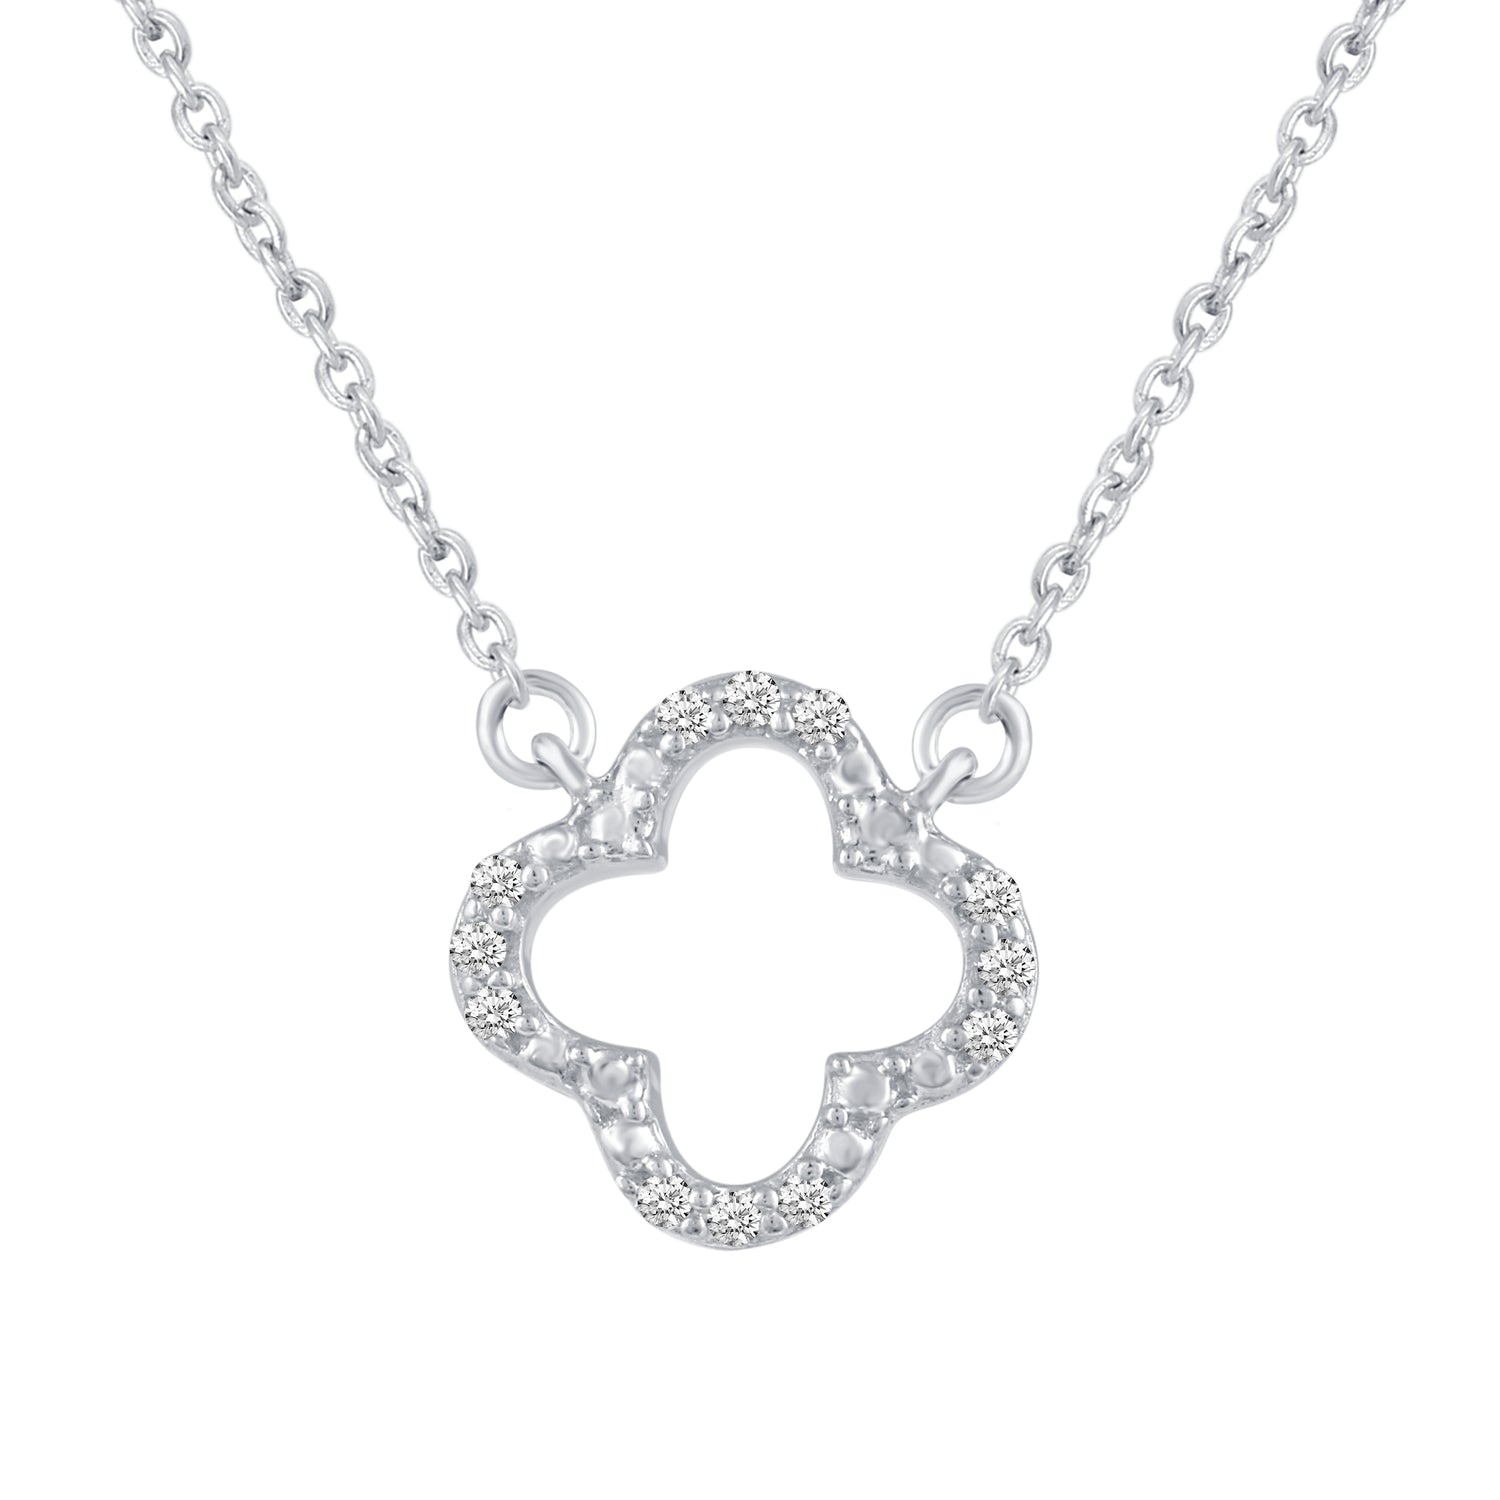 Bar and Leaf Clover Layered 1/10 Cttw Natural Diamond Pendant Necklace set in 925 Sterling Silver…